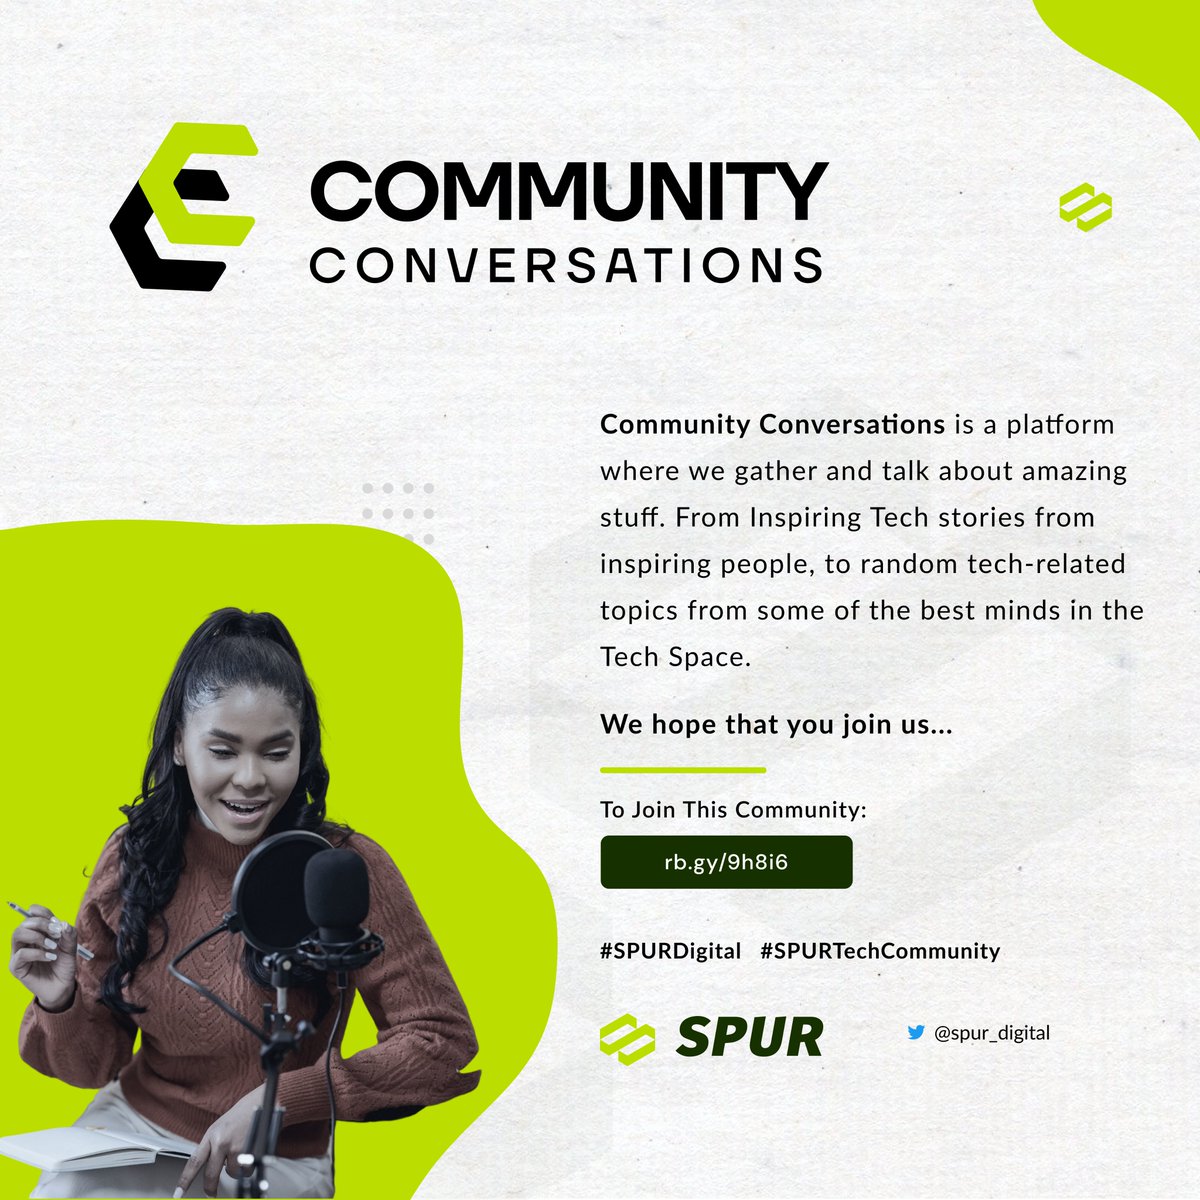 You're not ready for what we have coming on COMMUNITY CONVERSATIONS...
#CommunityConversations #TechTwitter #UIUX #UIUXDesigner #SPURDigital #SPURTechCommunity @spur_digital
Join Us:
rb.gy/9h8i6